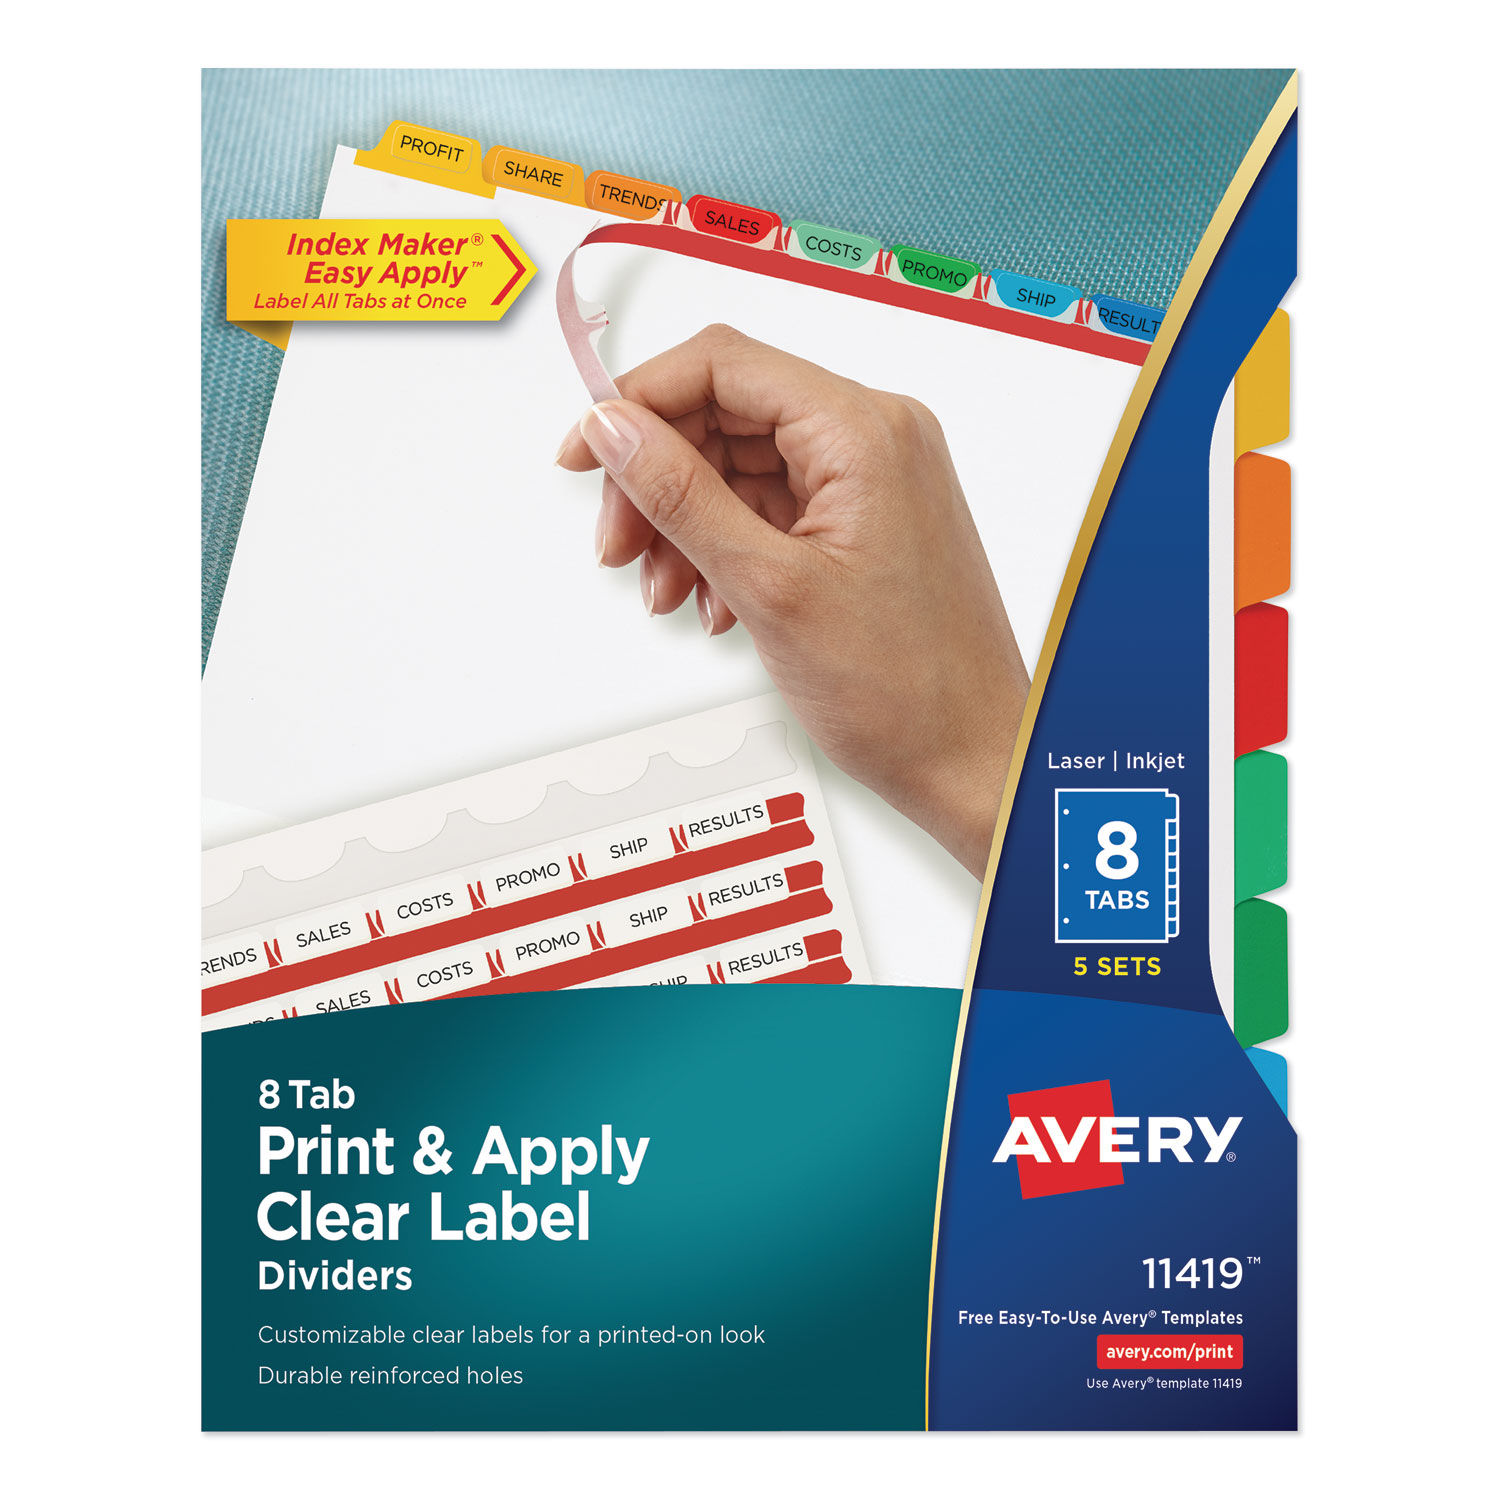 Print and Apply Index Maker Clear Label Dividers 8-Tab, Color Tabs, 11 x 8.5, White, Traditional Color Tabs, 5 Sets